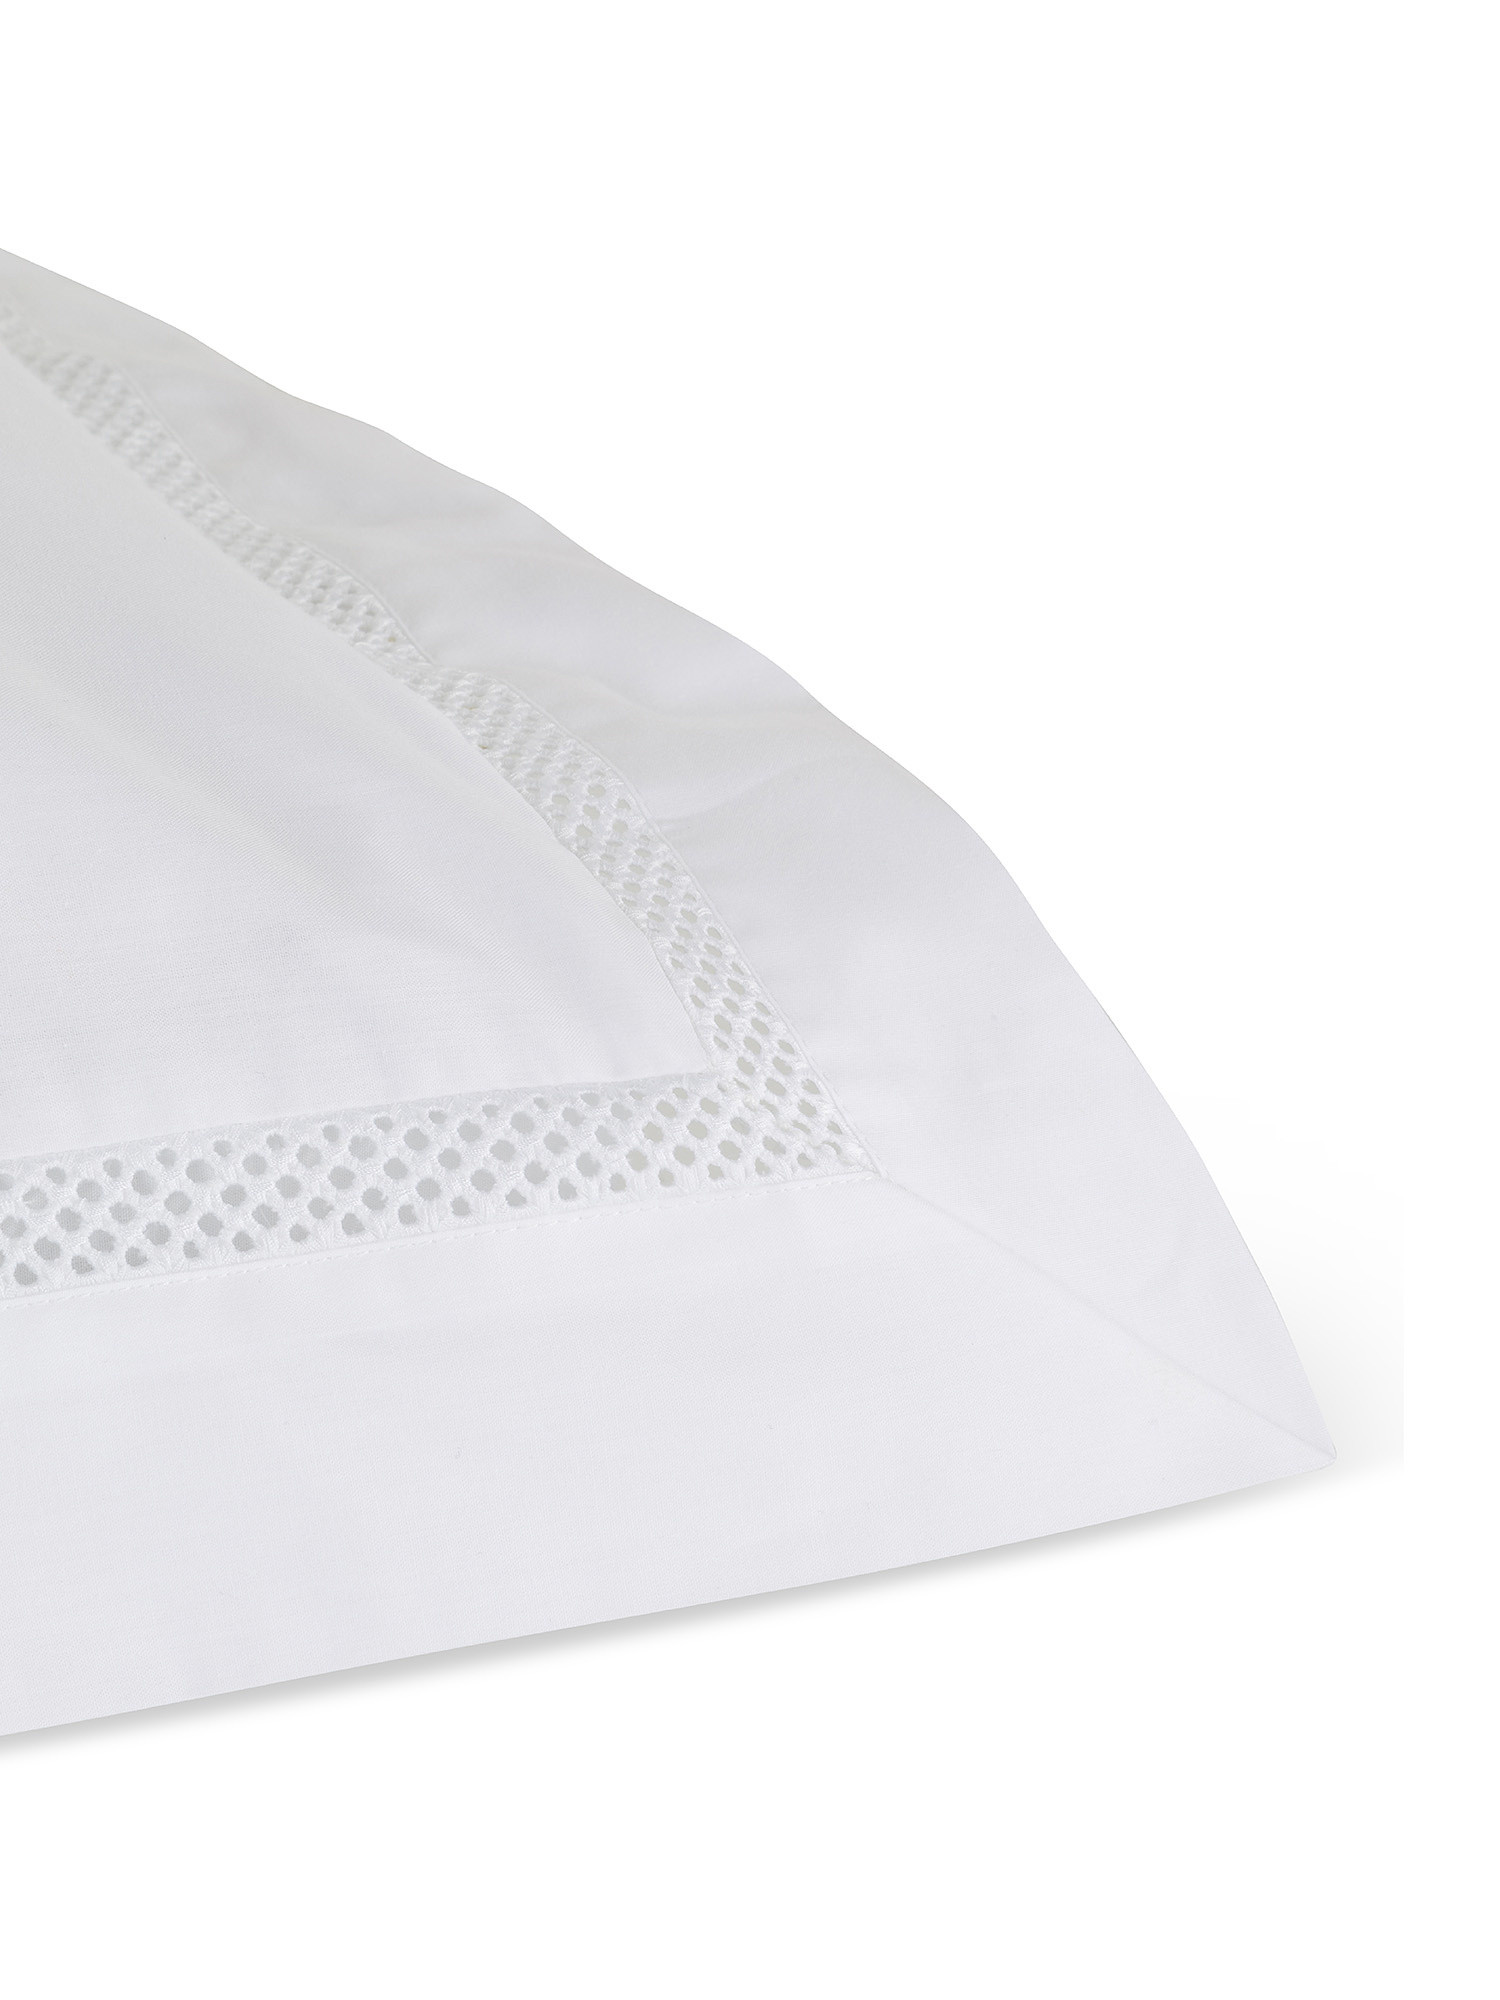 Portofino pillowcase in 100% cotton percale with drawn thread work, , large image number 1